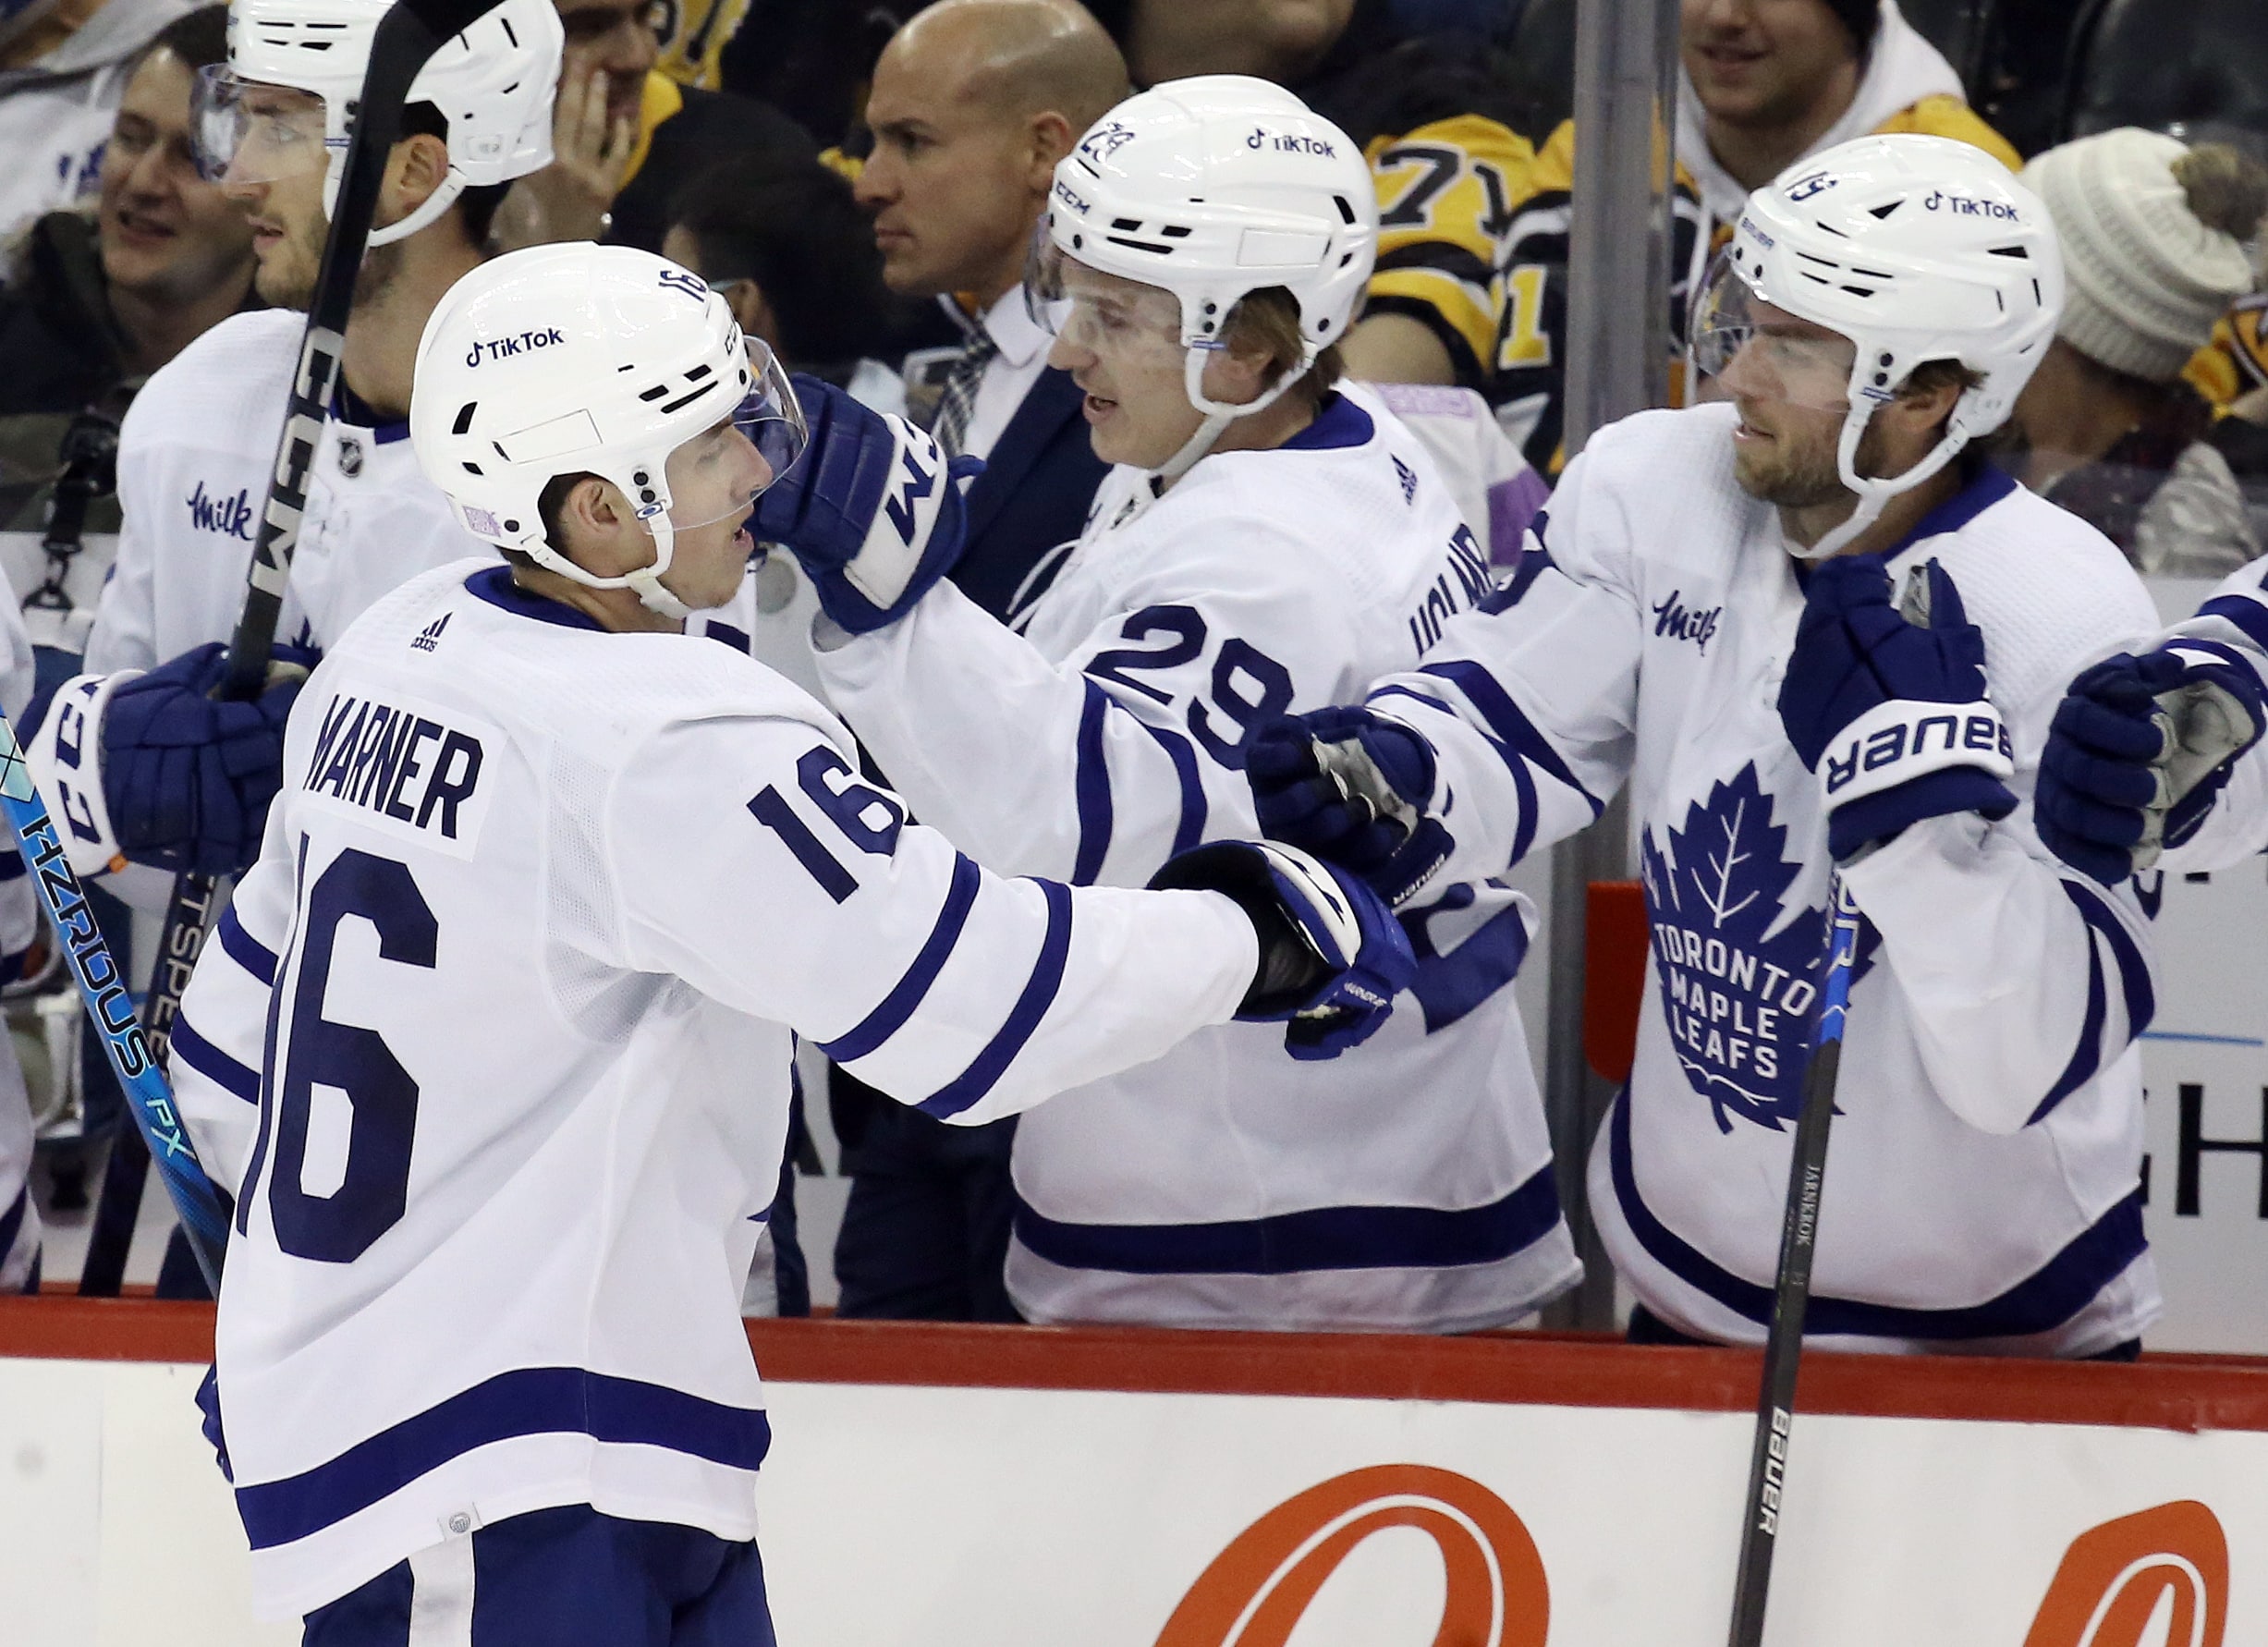 Best NHL player prop bets for today 11/30 – Marner carries the Leafs